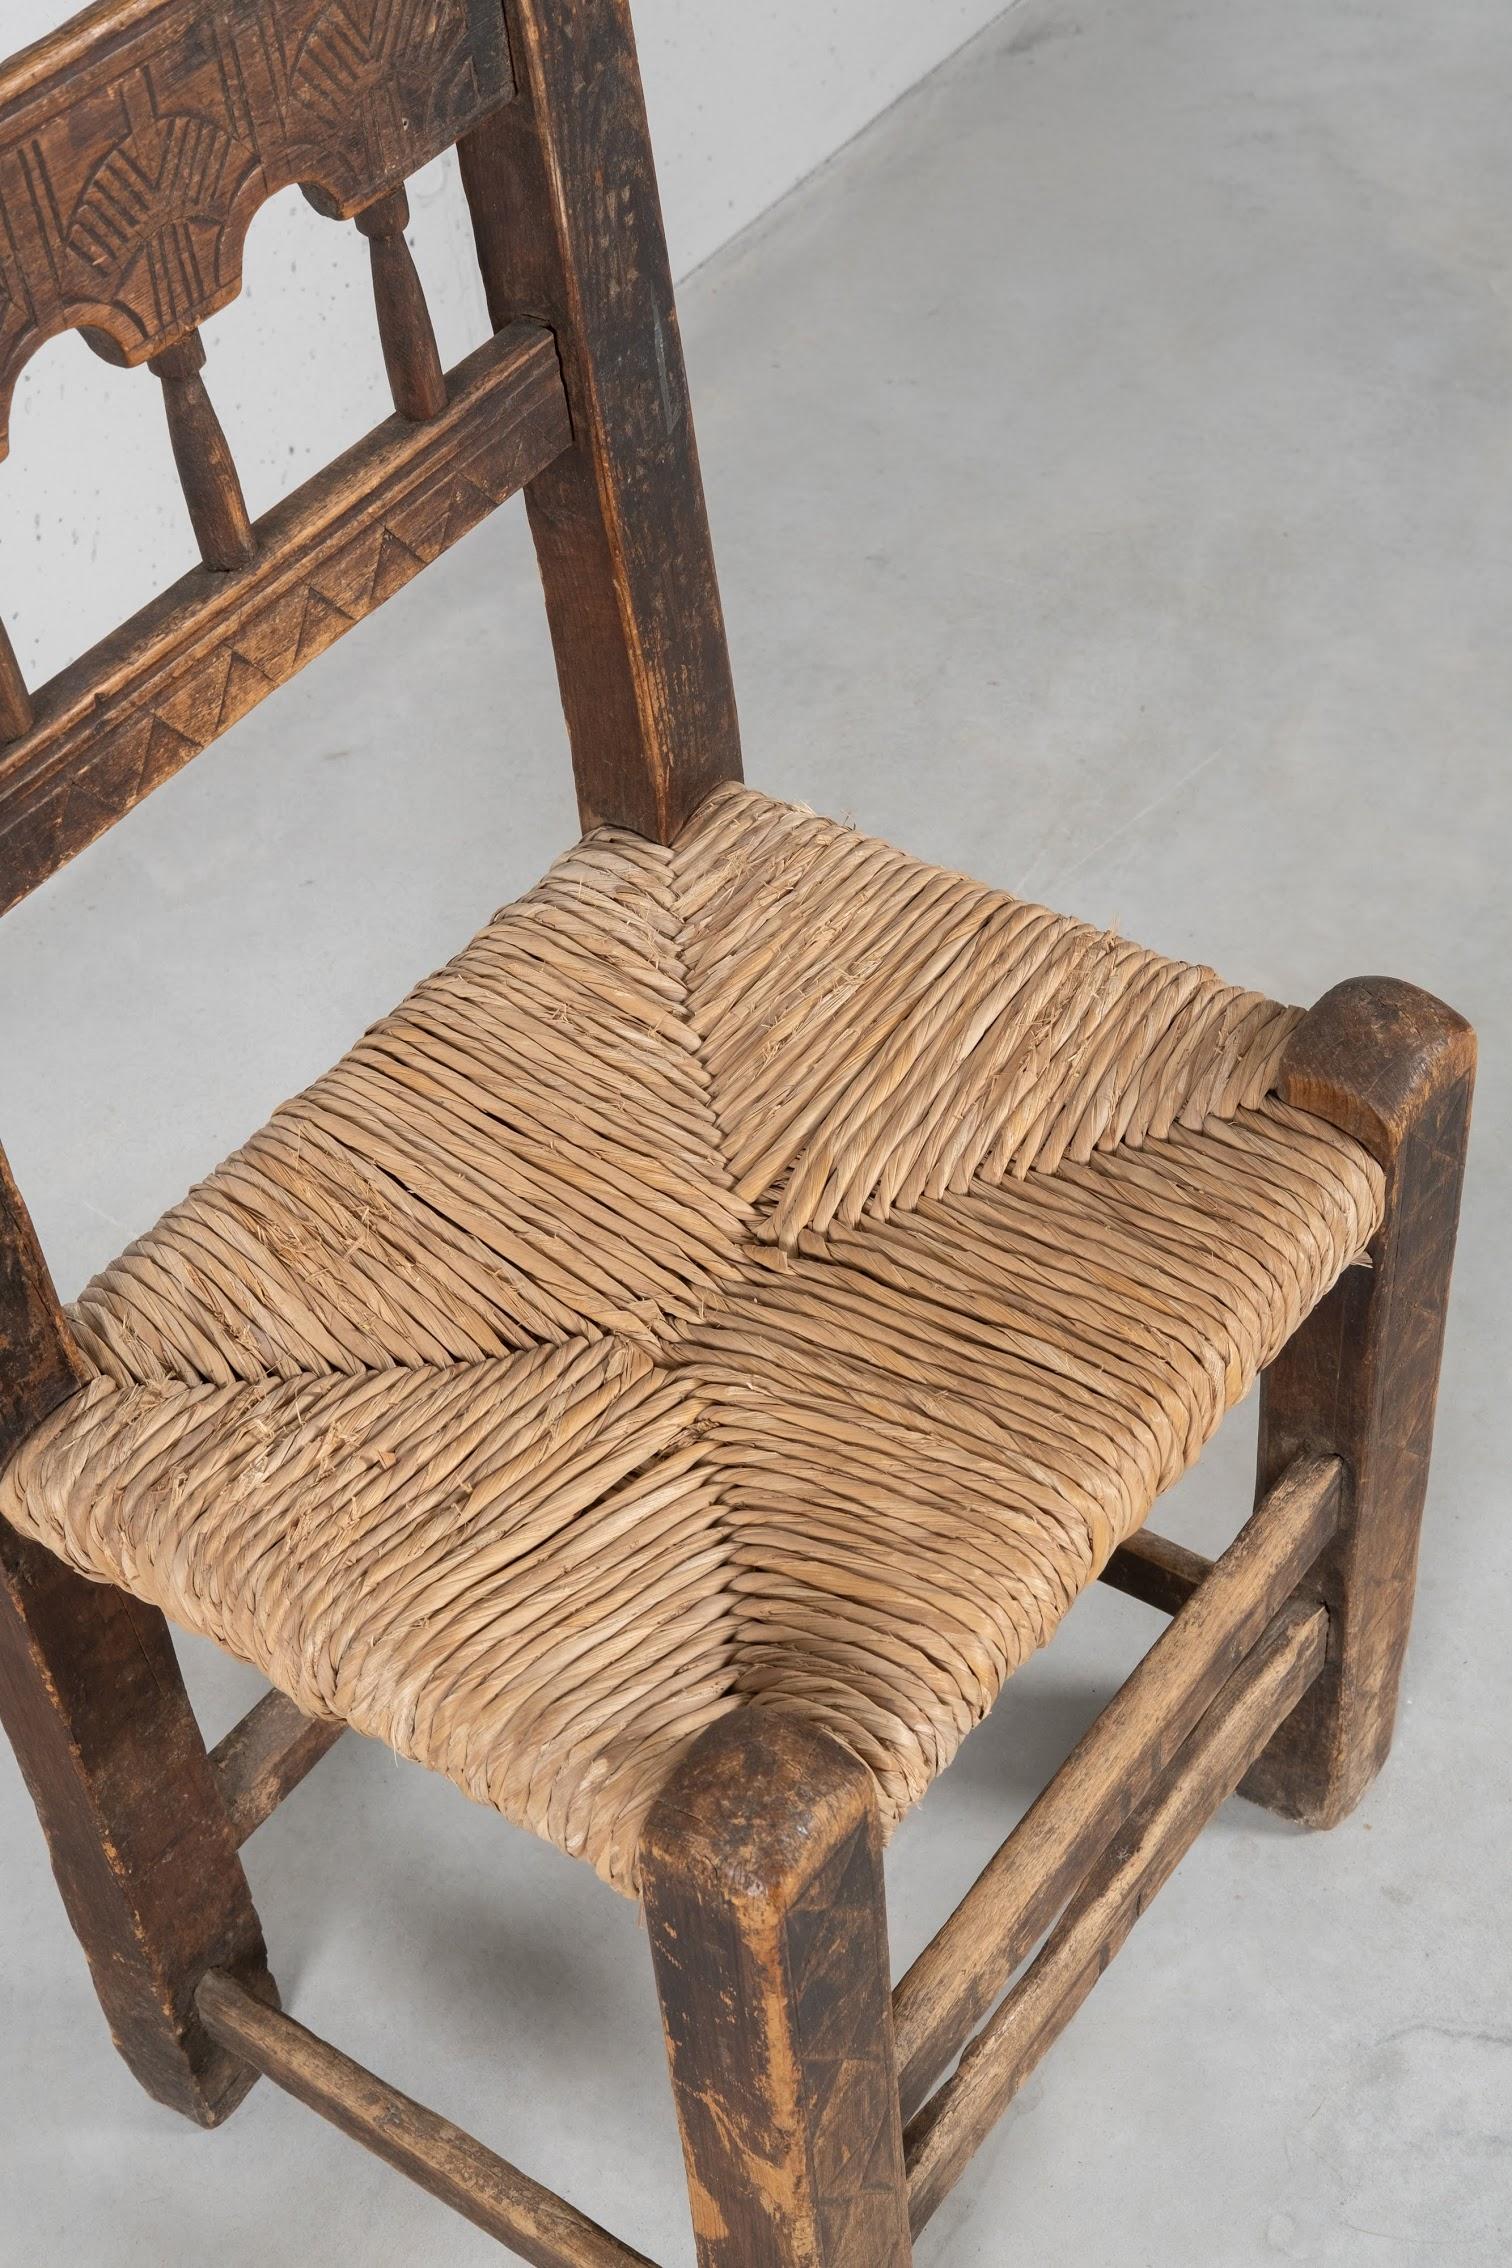 Poplar Straw-Bottom Chair, East Europe, Early 1800 For Sale 1